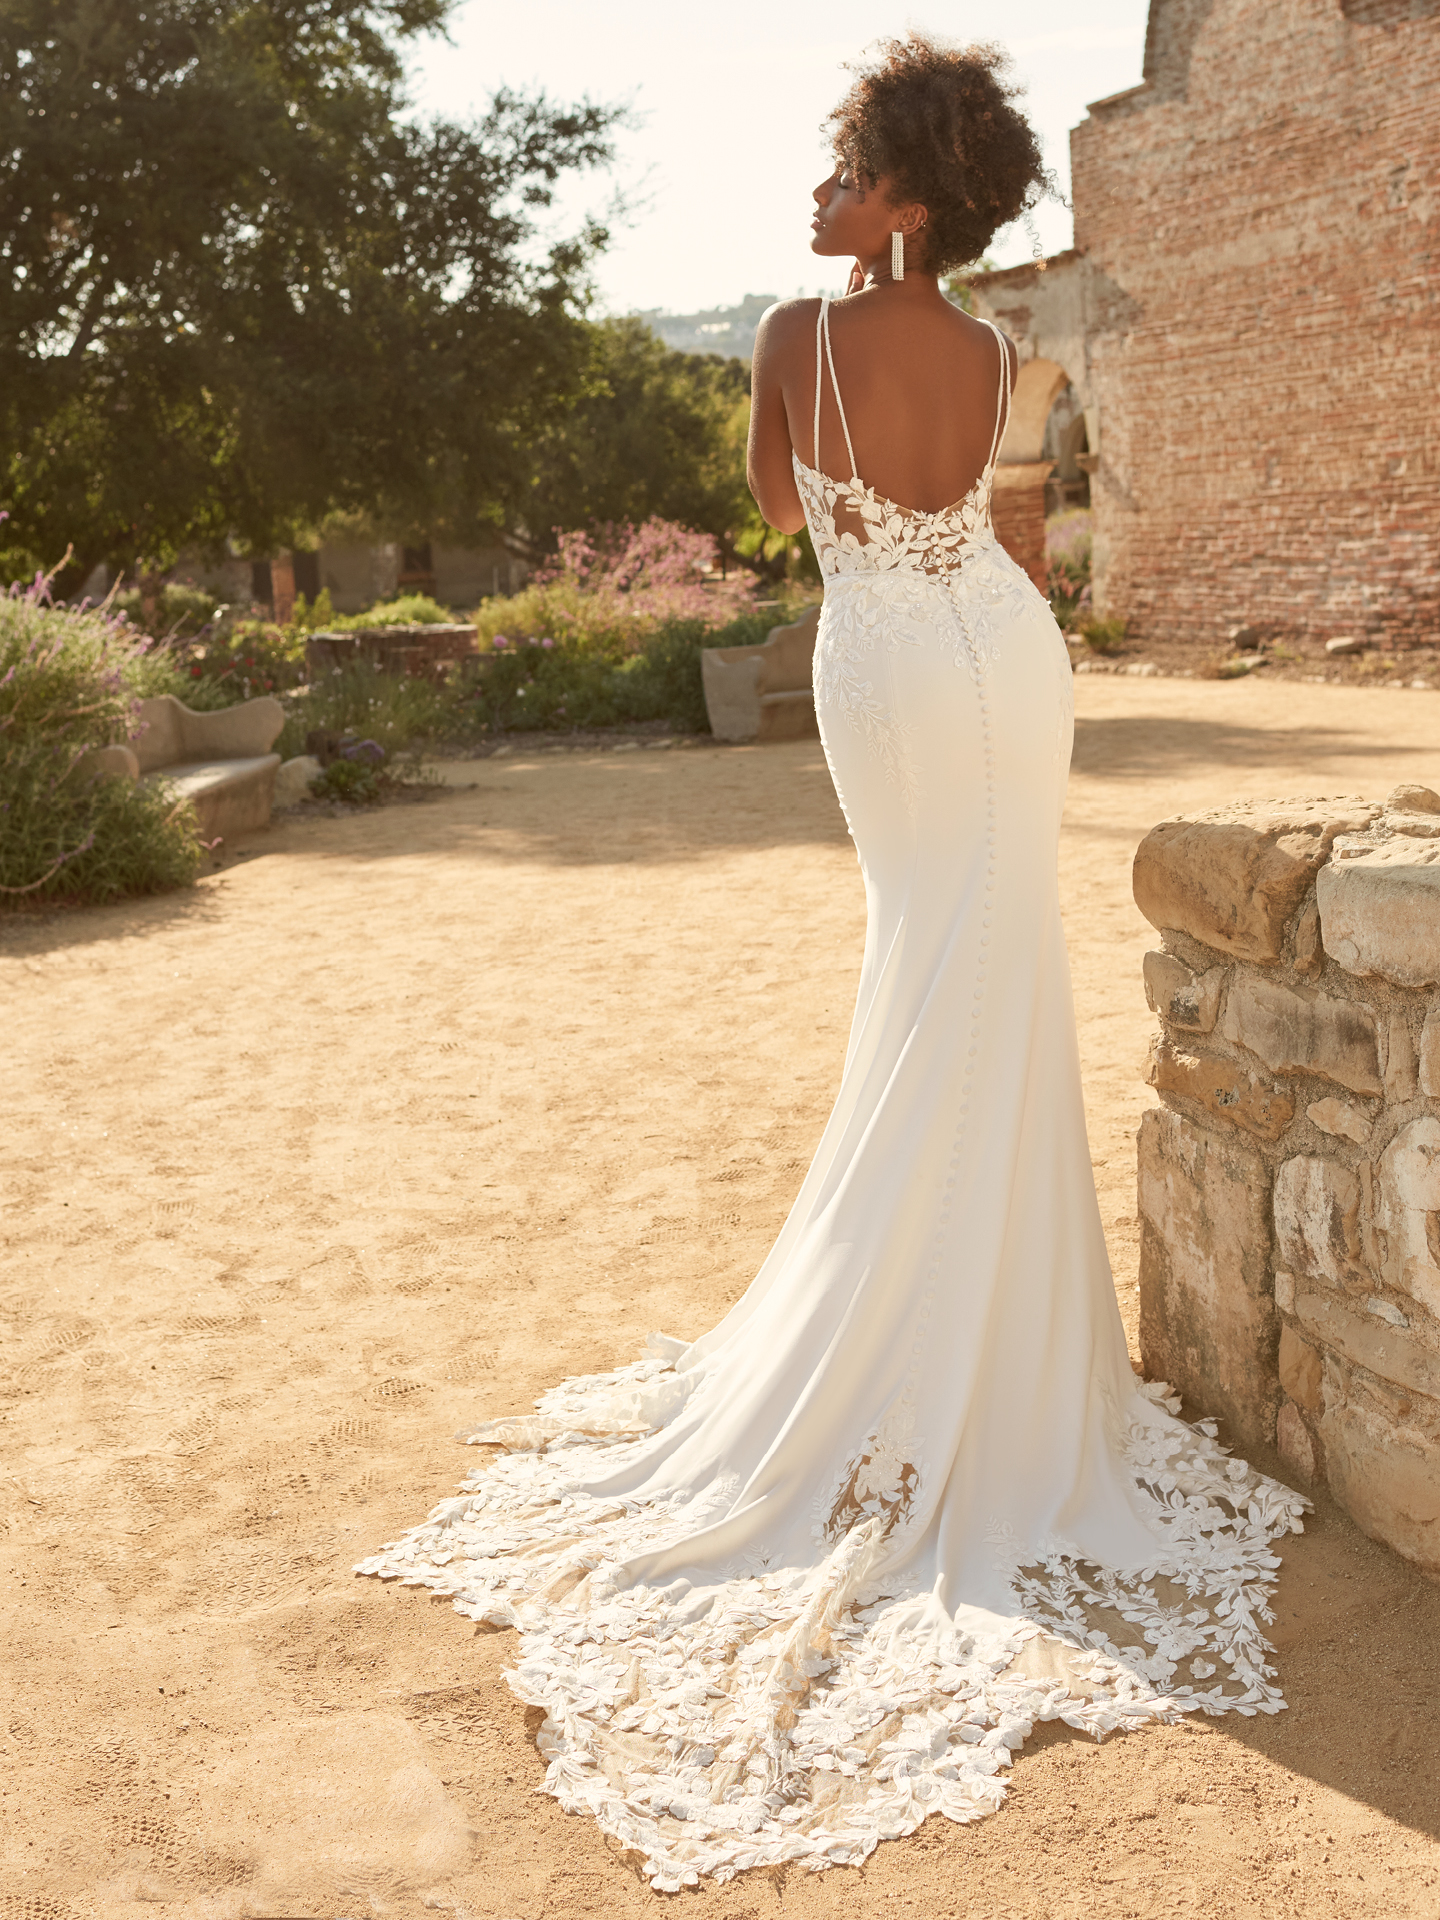 Bride Wearing A Sheath Crepe Dress Called Baxley By Maggie Sottero